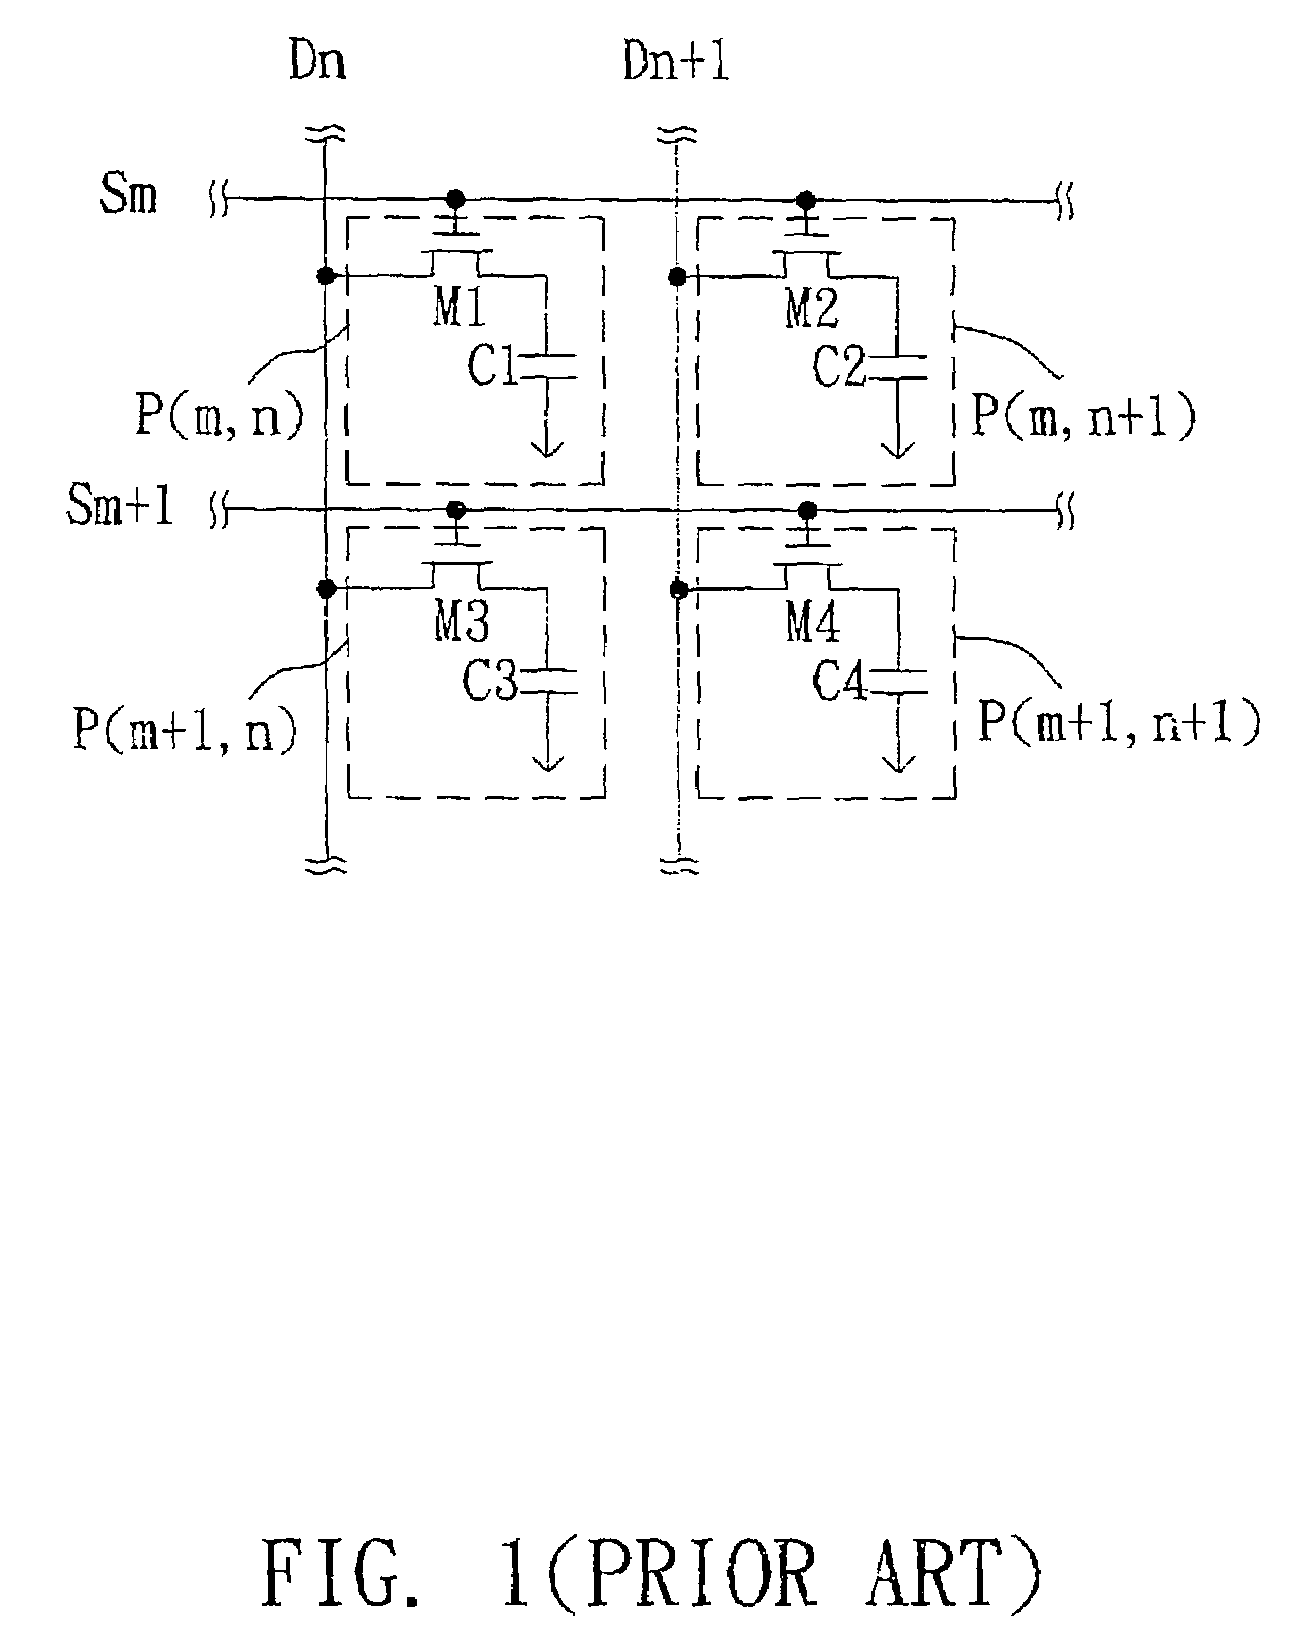 Display apparatus with a time domain multiplex driving circuit